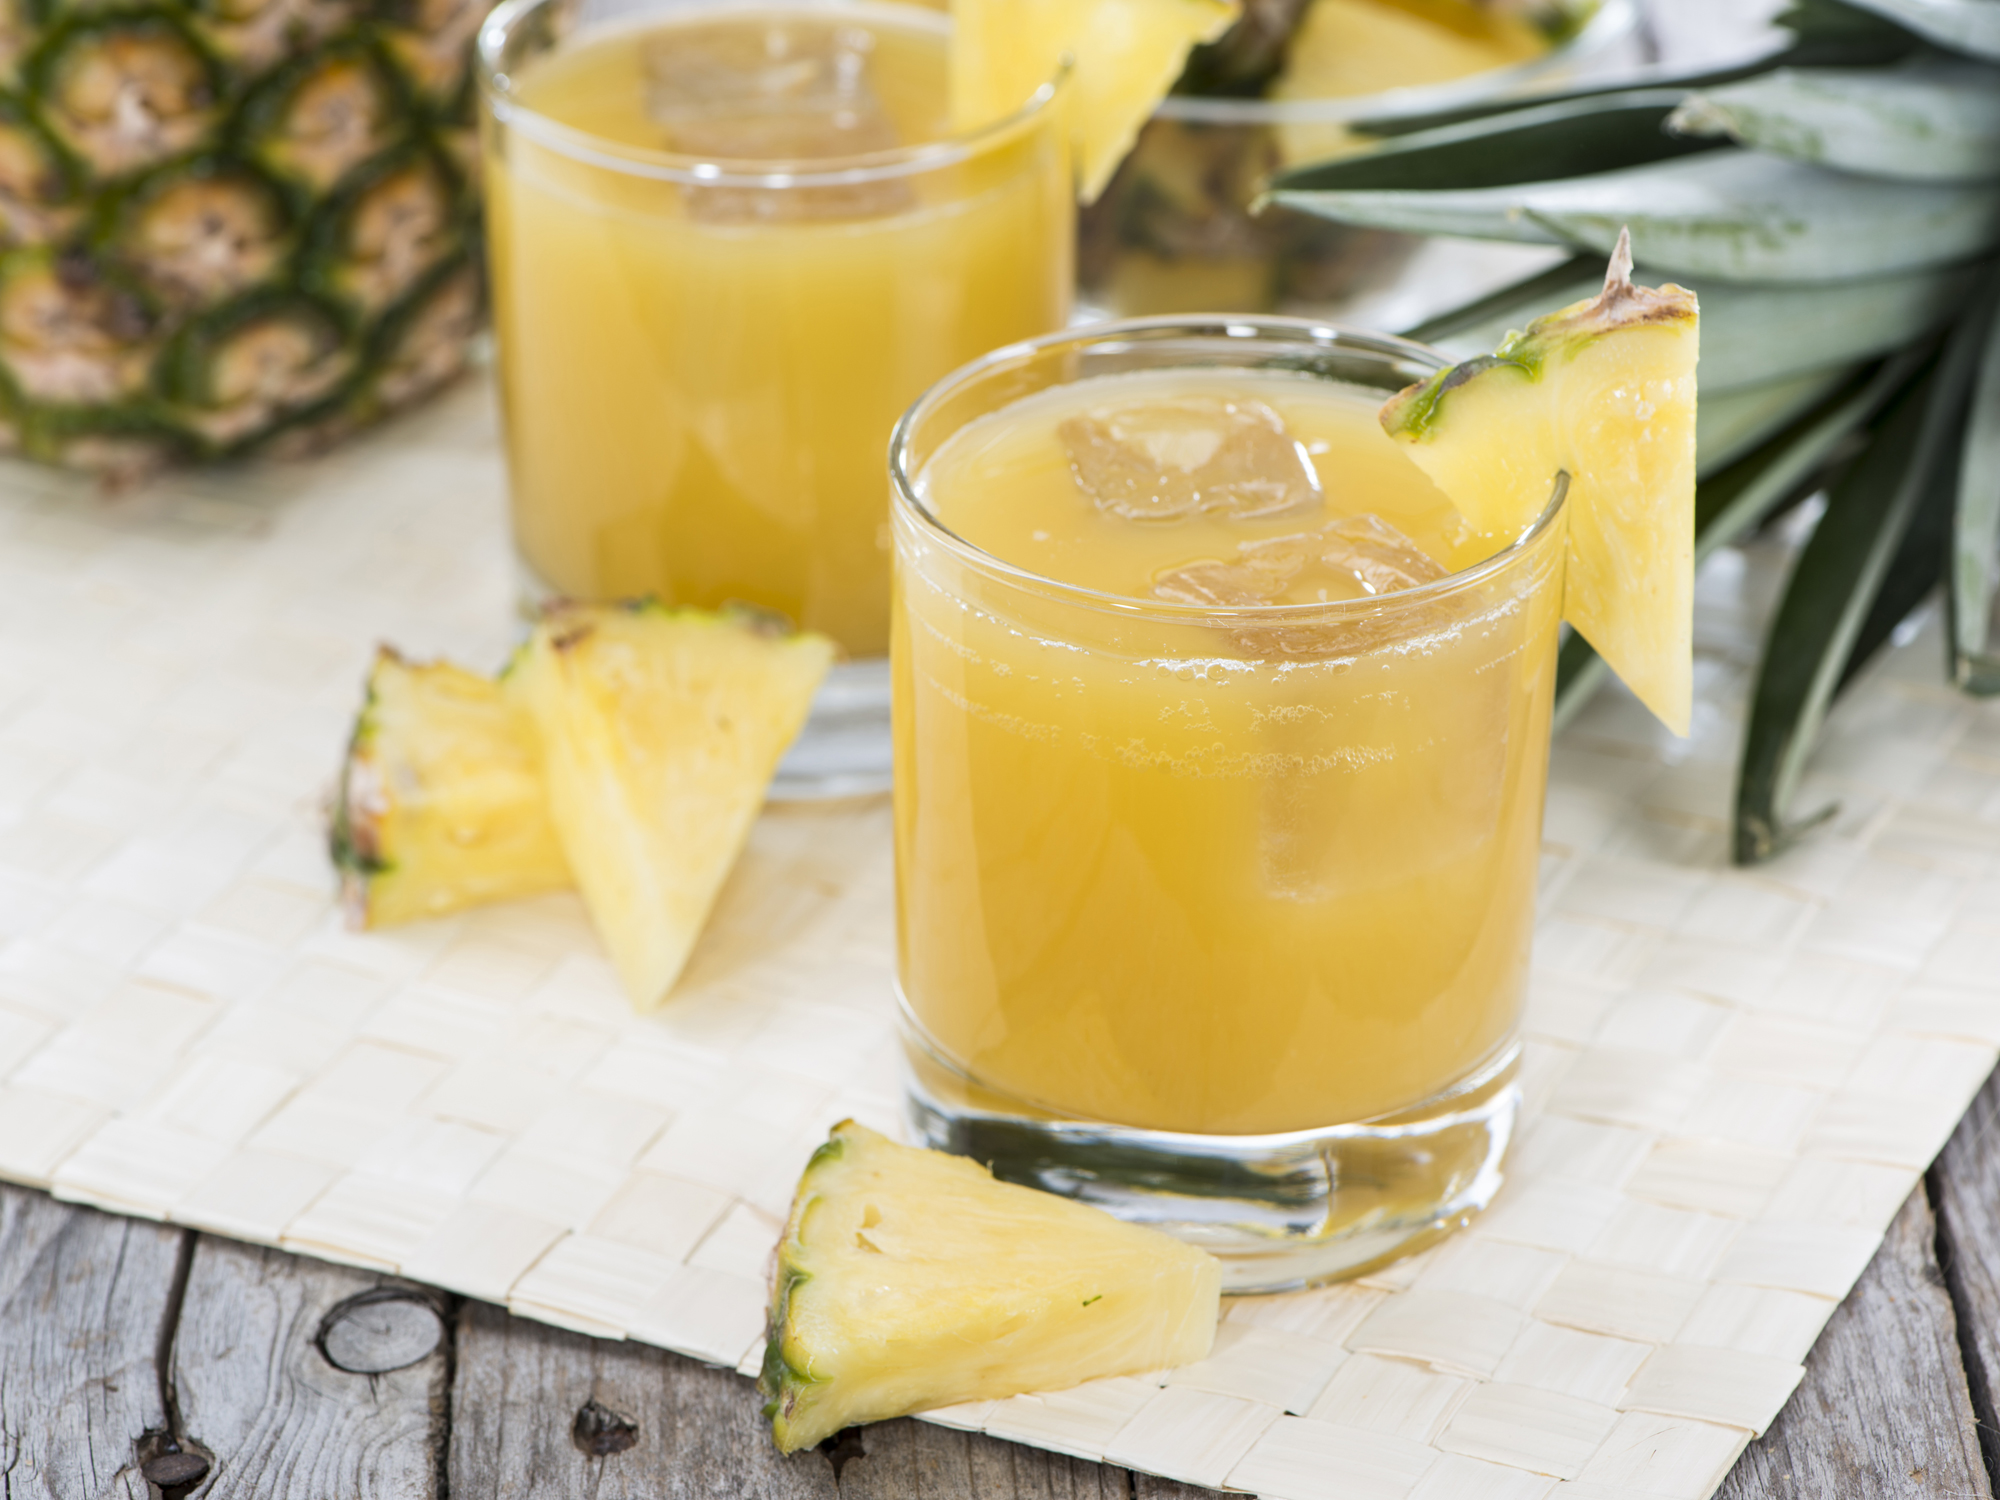 This 6-ingredient drink squashes joint pain